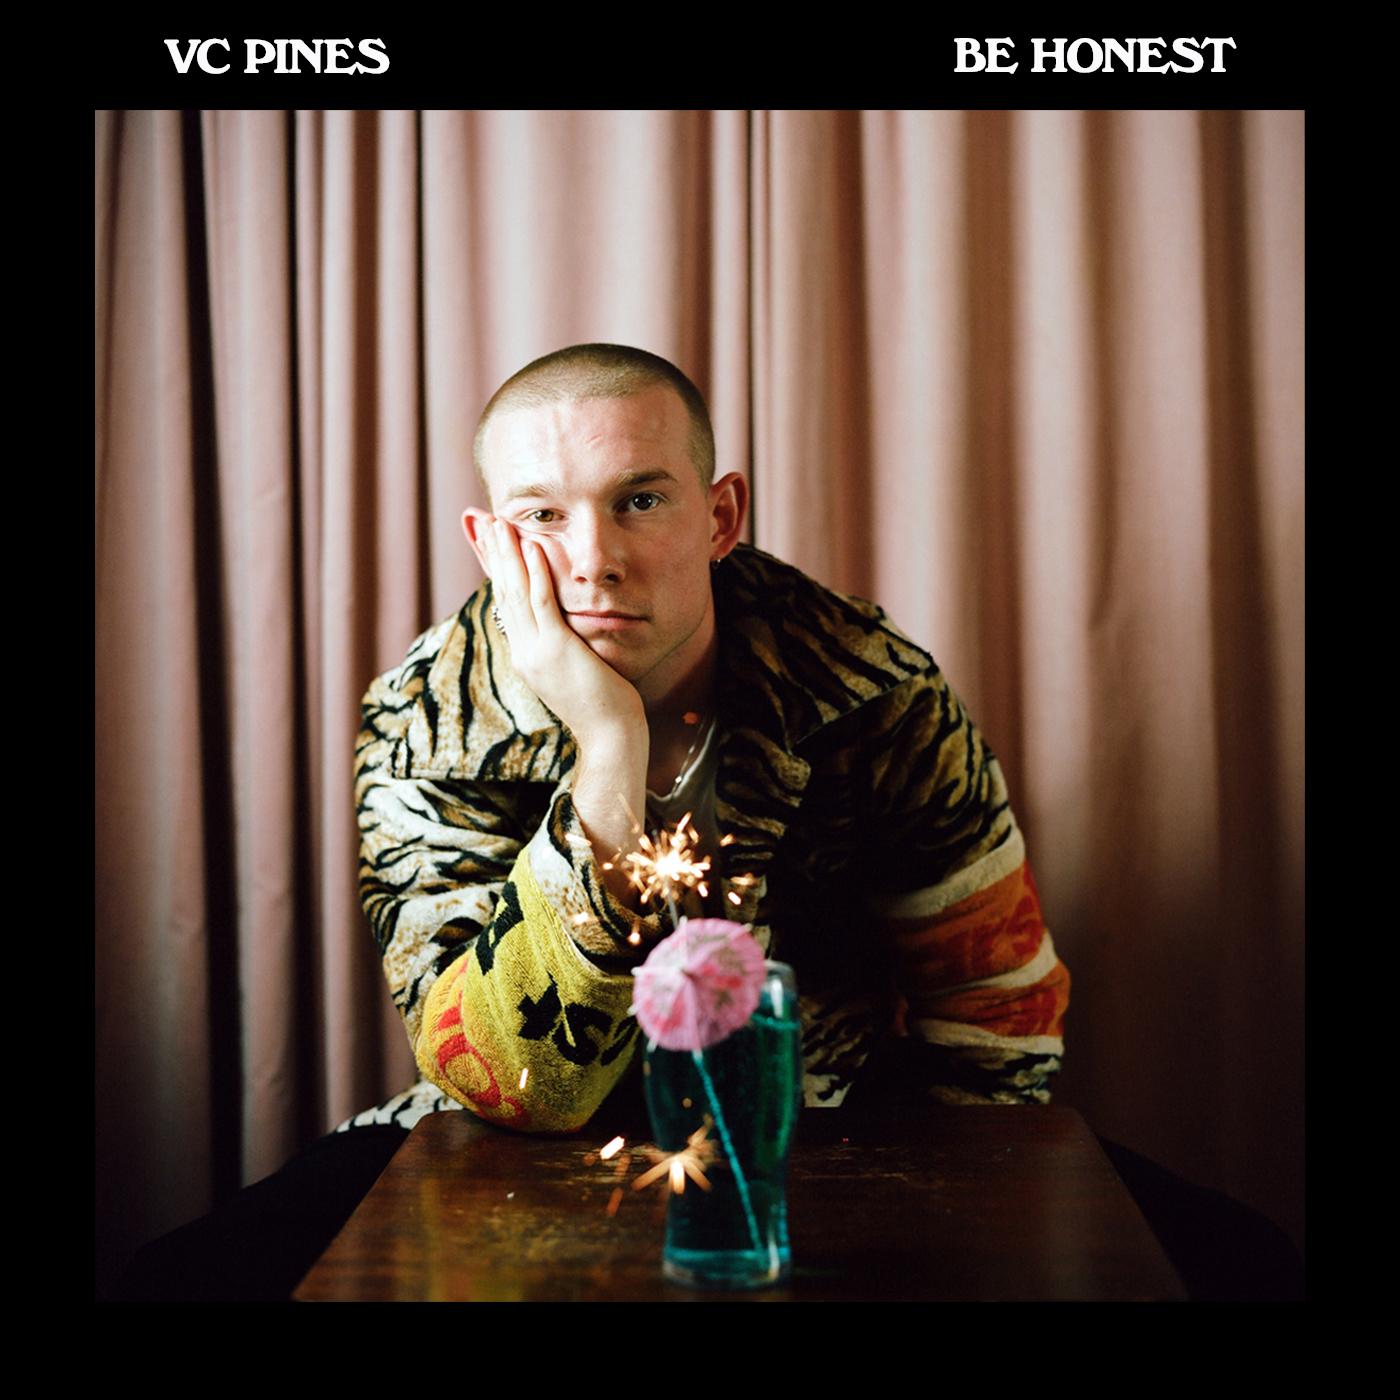 be honest - vc pines - uk - indie - indie music - indie pop - new music - music blog - wolf in a suit - wolfinasuit - wolf in a suit blog - wolf in a suit music blog